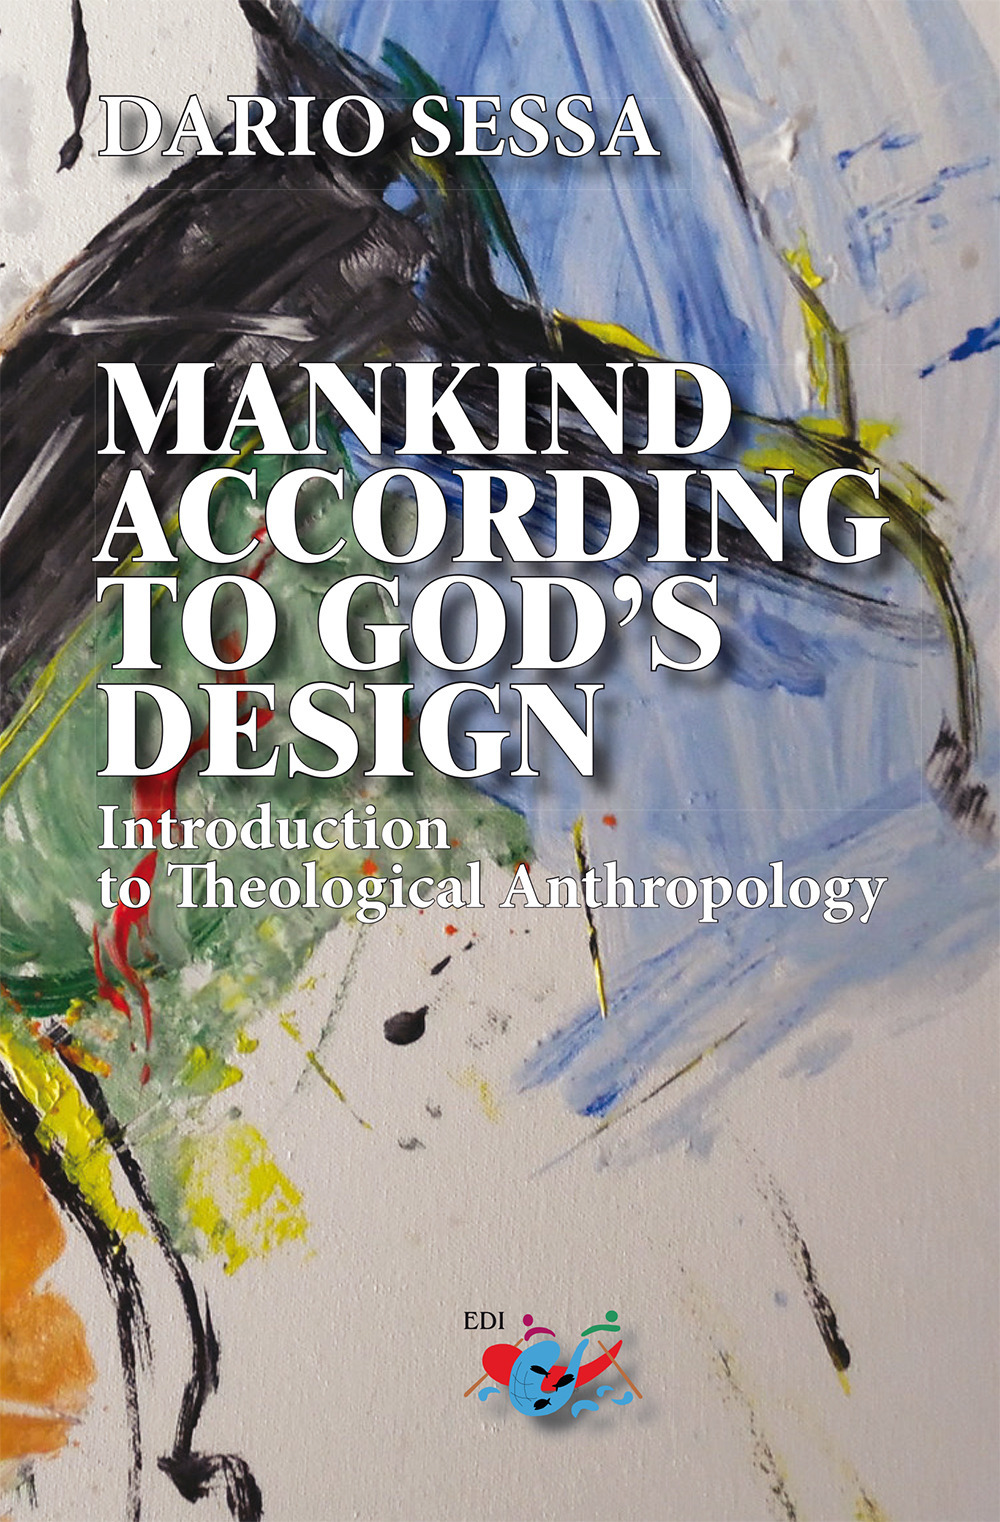 Mankind according to God's design. Introduction to teological anthropology